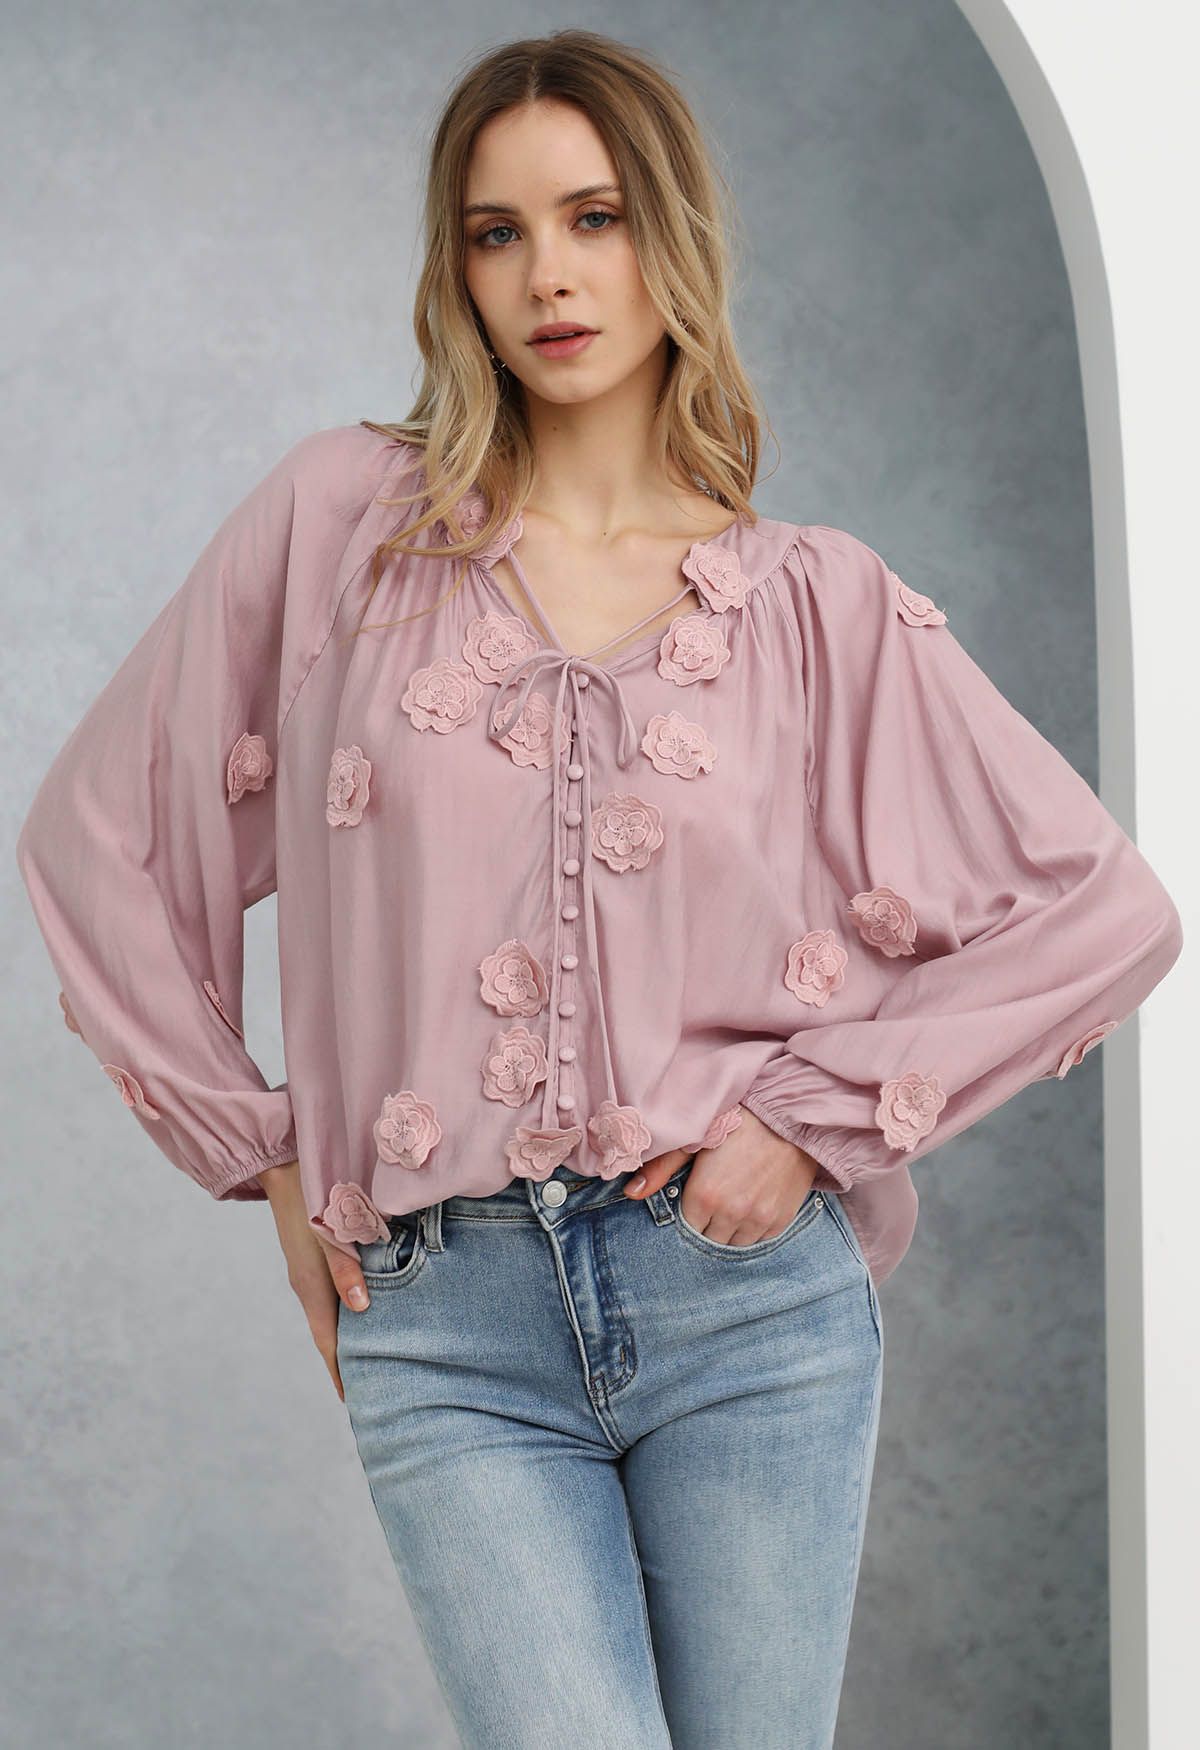 Romantic Blossom 3D Lace Flowers Buttoned Shirt in Pink